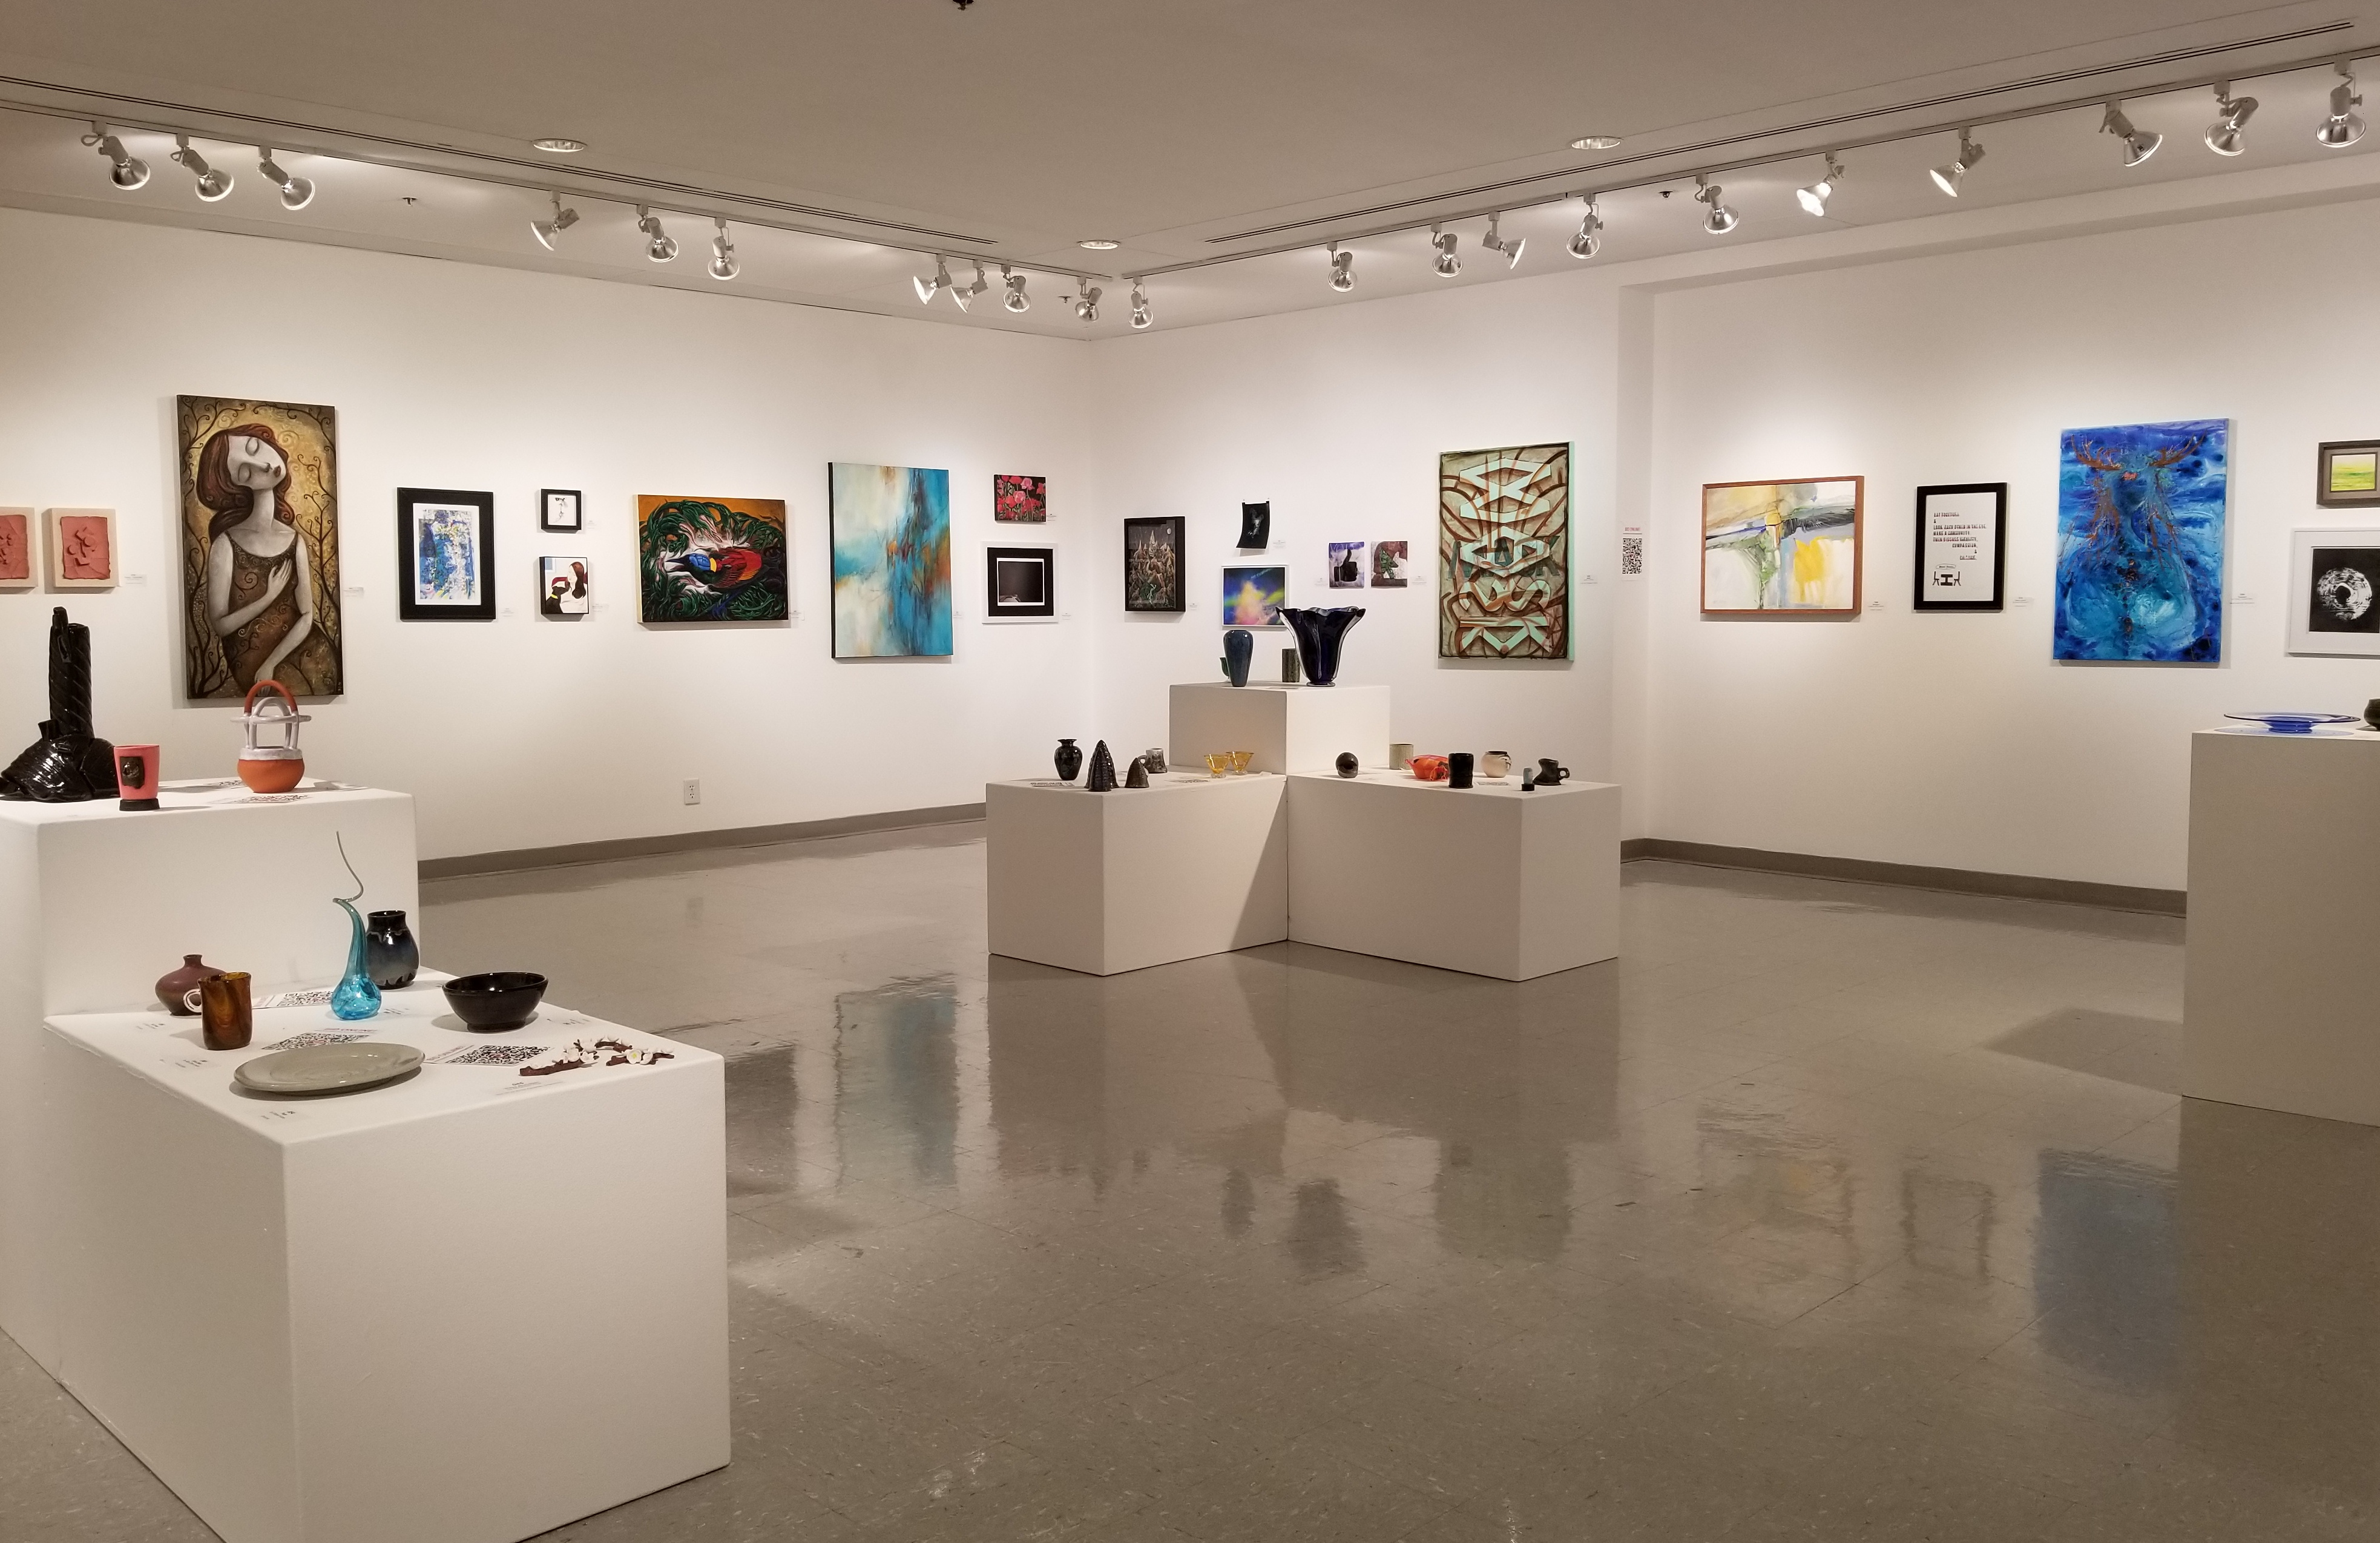 interior shot of art gallery with artwork hanging on walls and sitting on pedestals